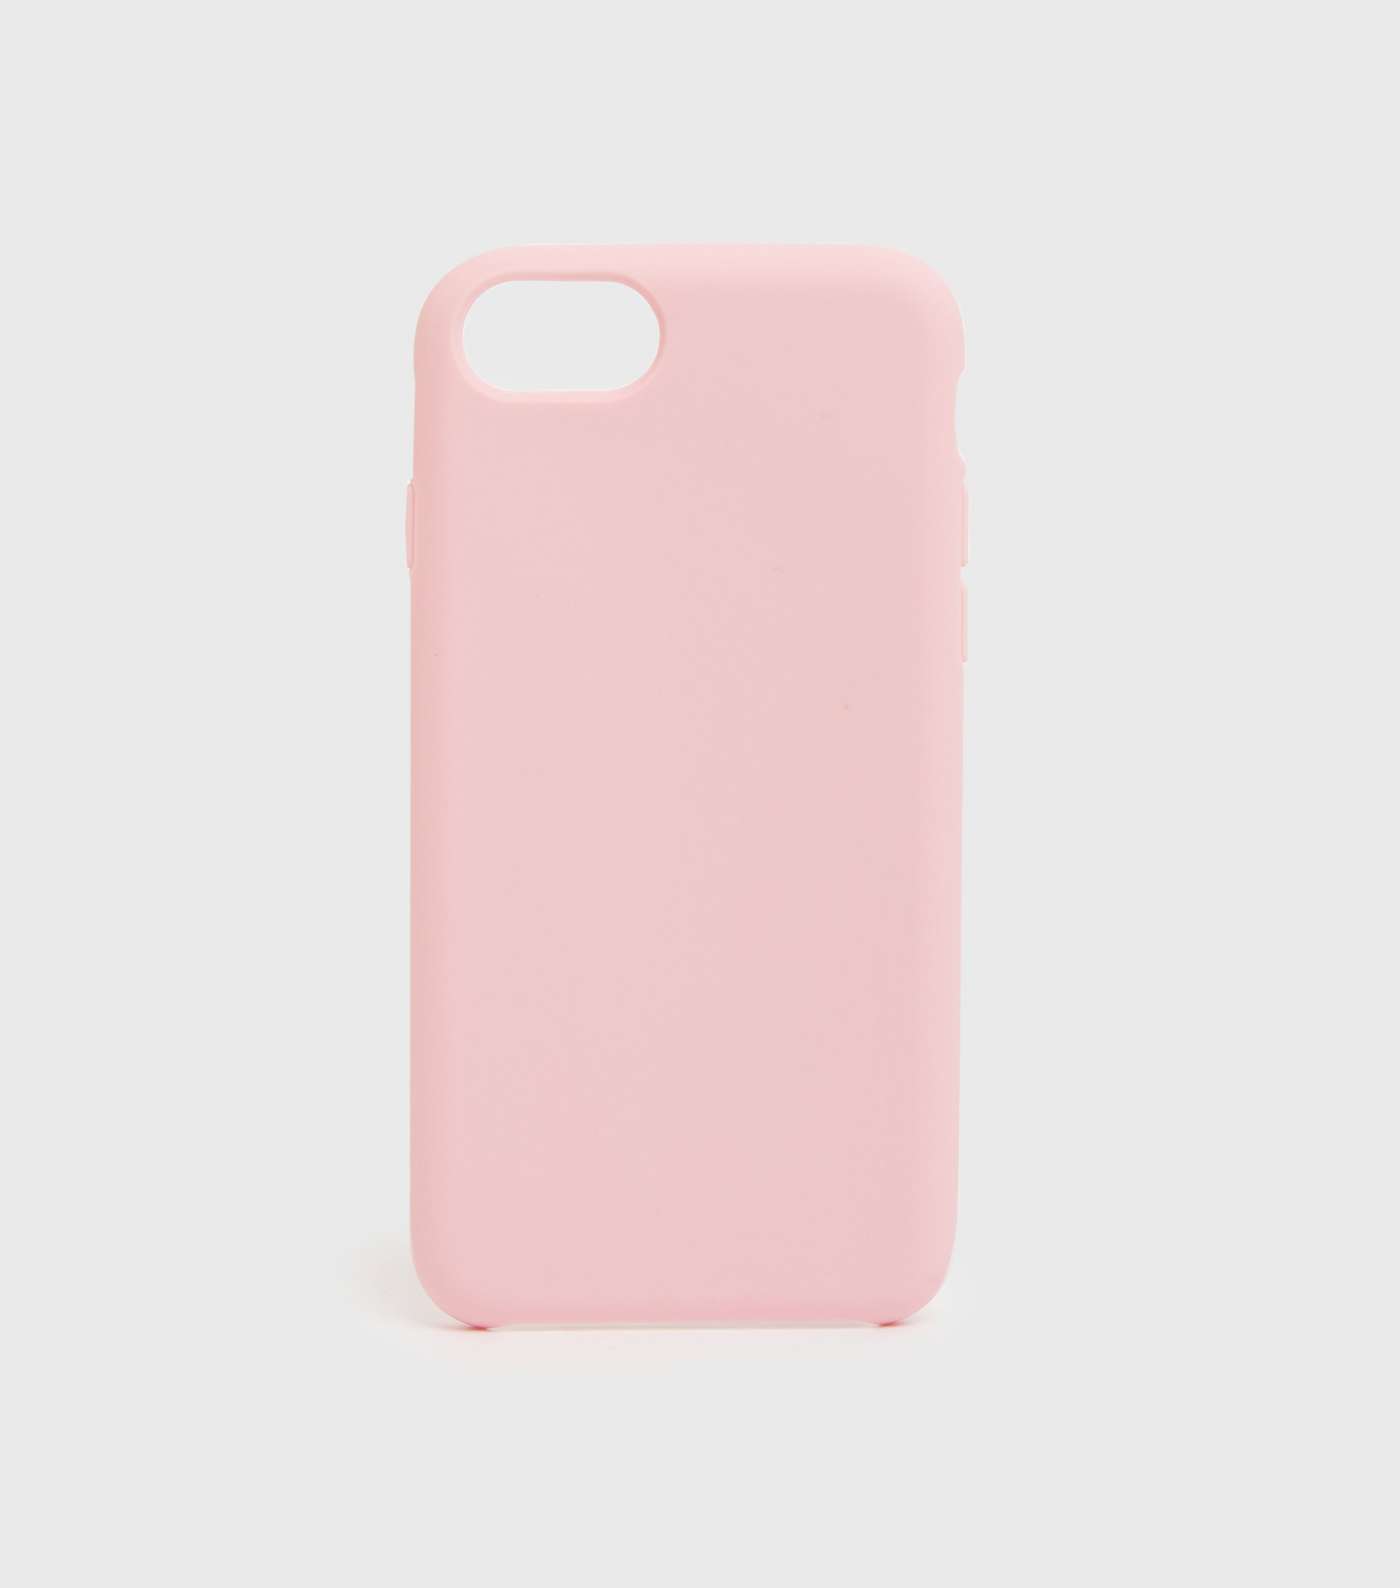 Pale Pink Soft Touch Case For iPhone 6/6S/7/8